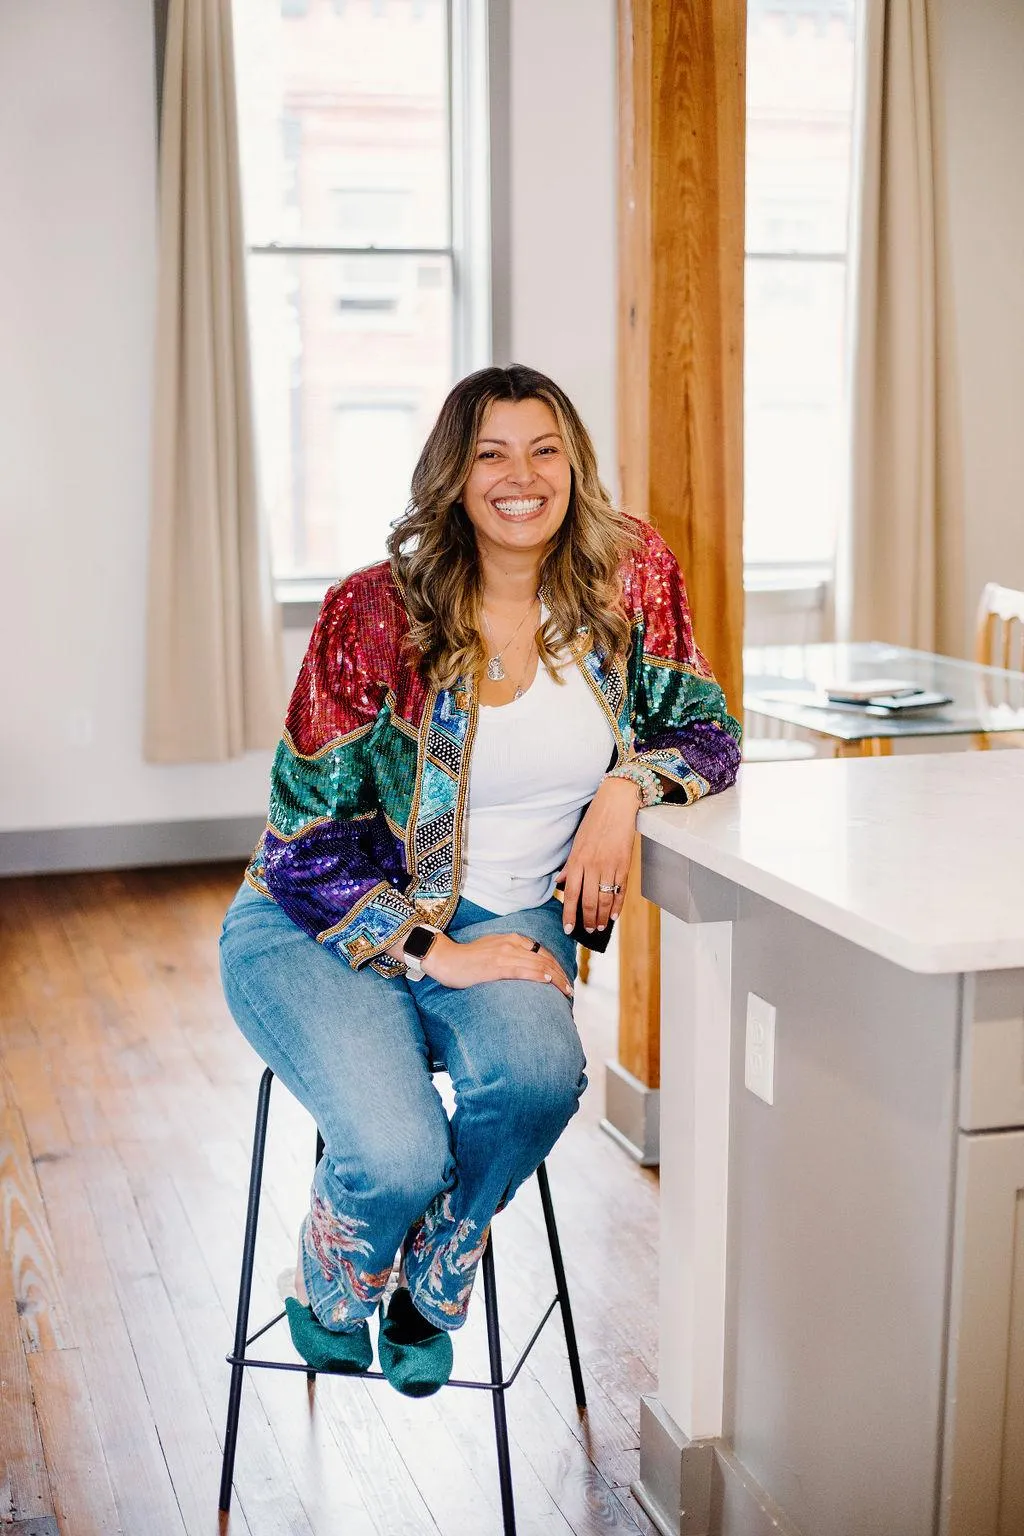 Gigi seating on a bar stool, smiling. Wearing jeans, a white t-shirt and a sequin jacket.